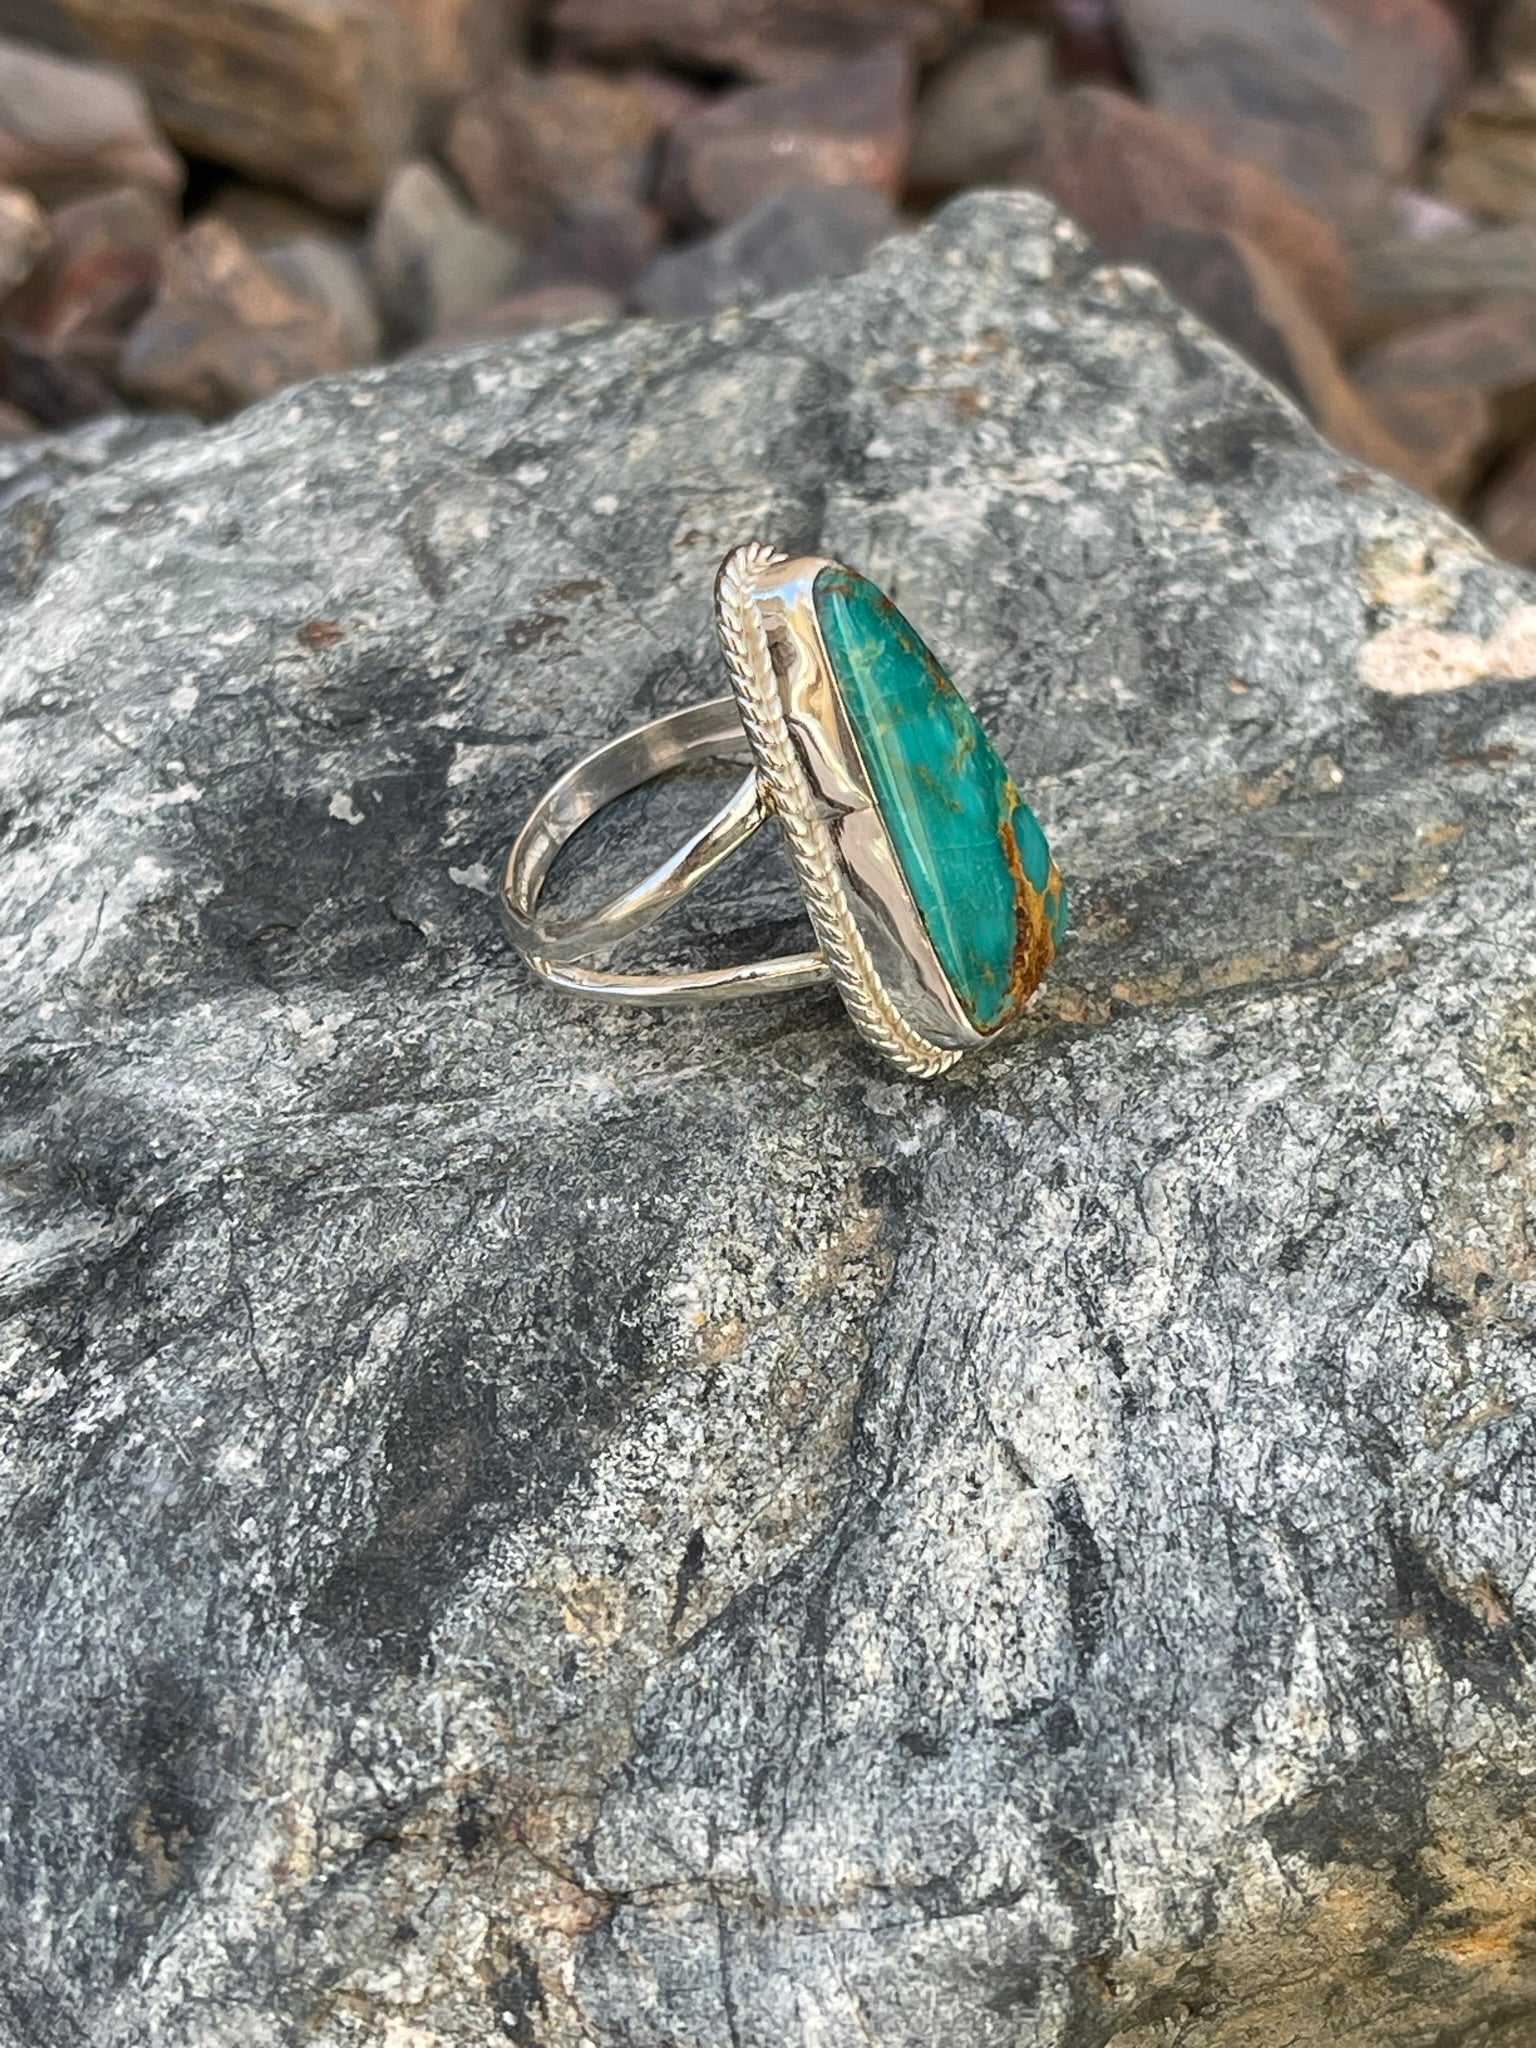 Handmade Solid Sterling Silver Teal Royston Turquoise Ring with Twist Trim - Size 10